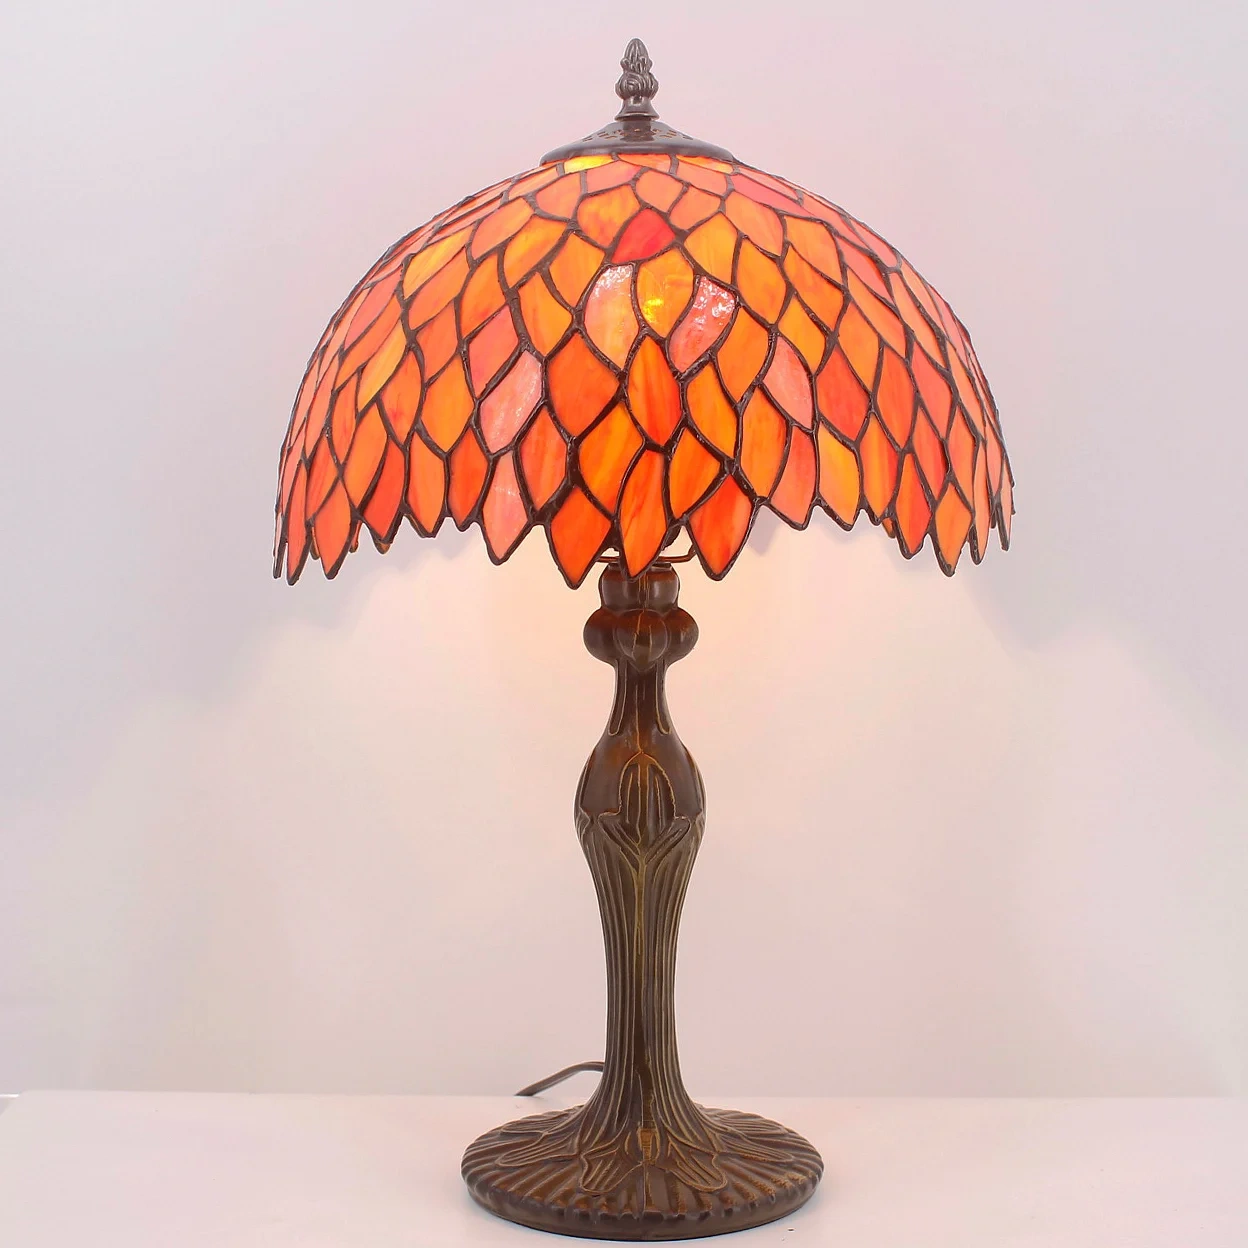 Tiffany Lamp Table Stained Glass Bedside Lamp Red Wisteria Memory Vintage Traditional Style Desk Reading Light 18